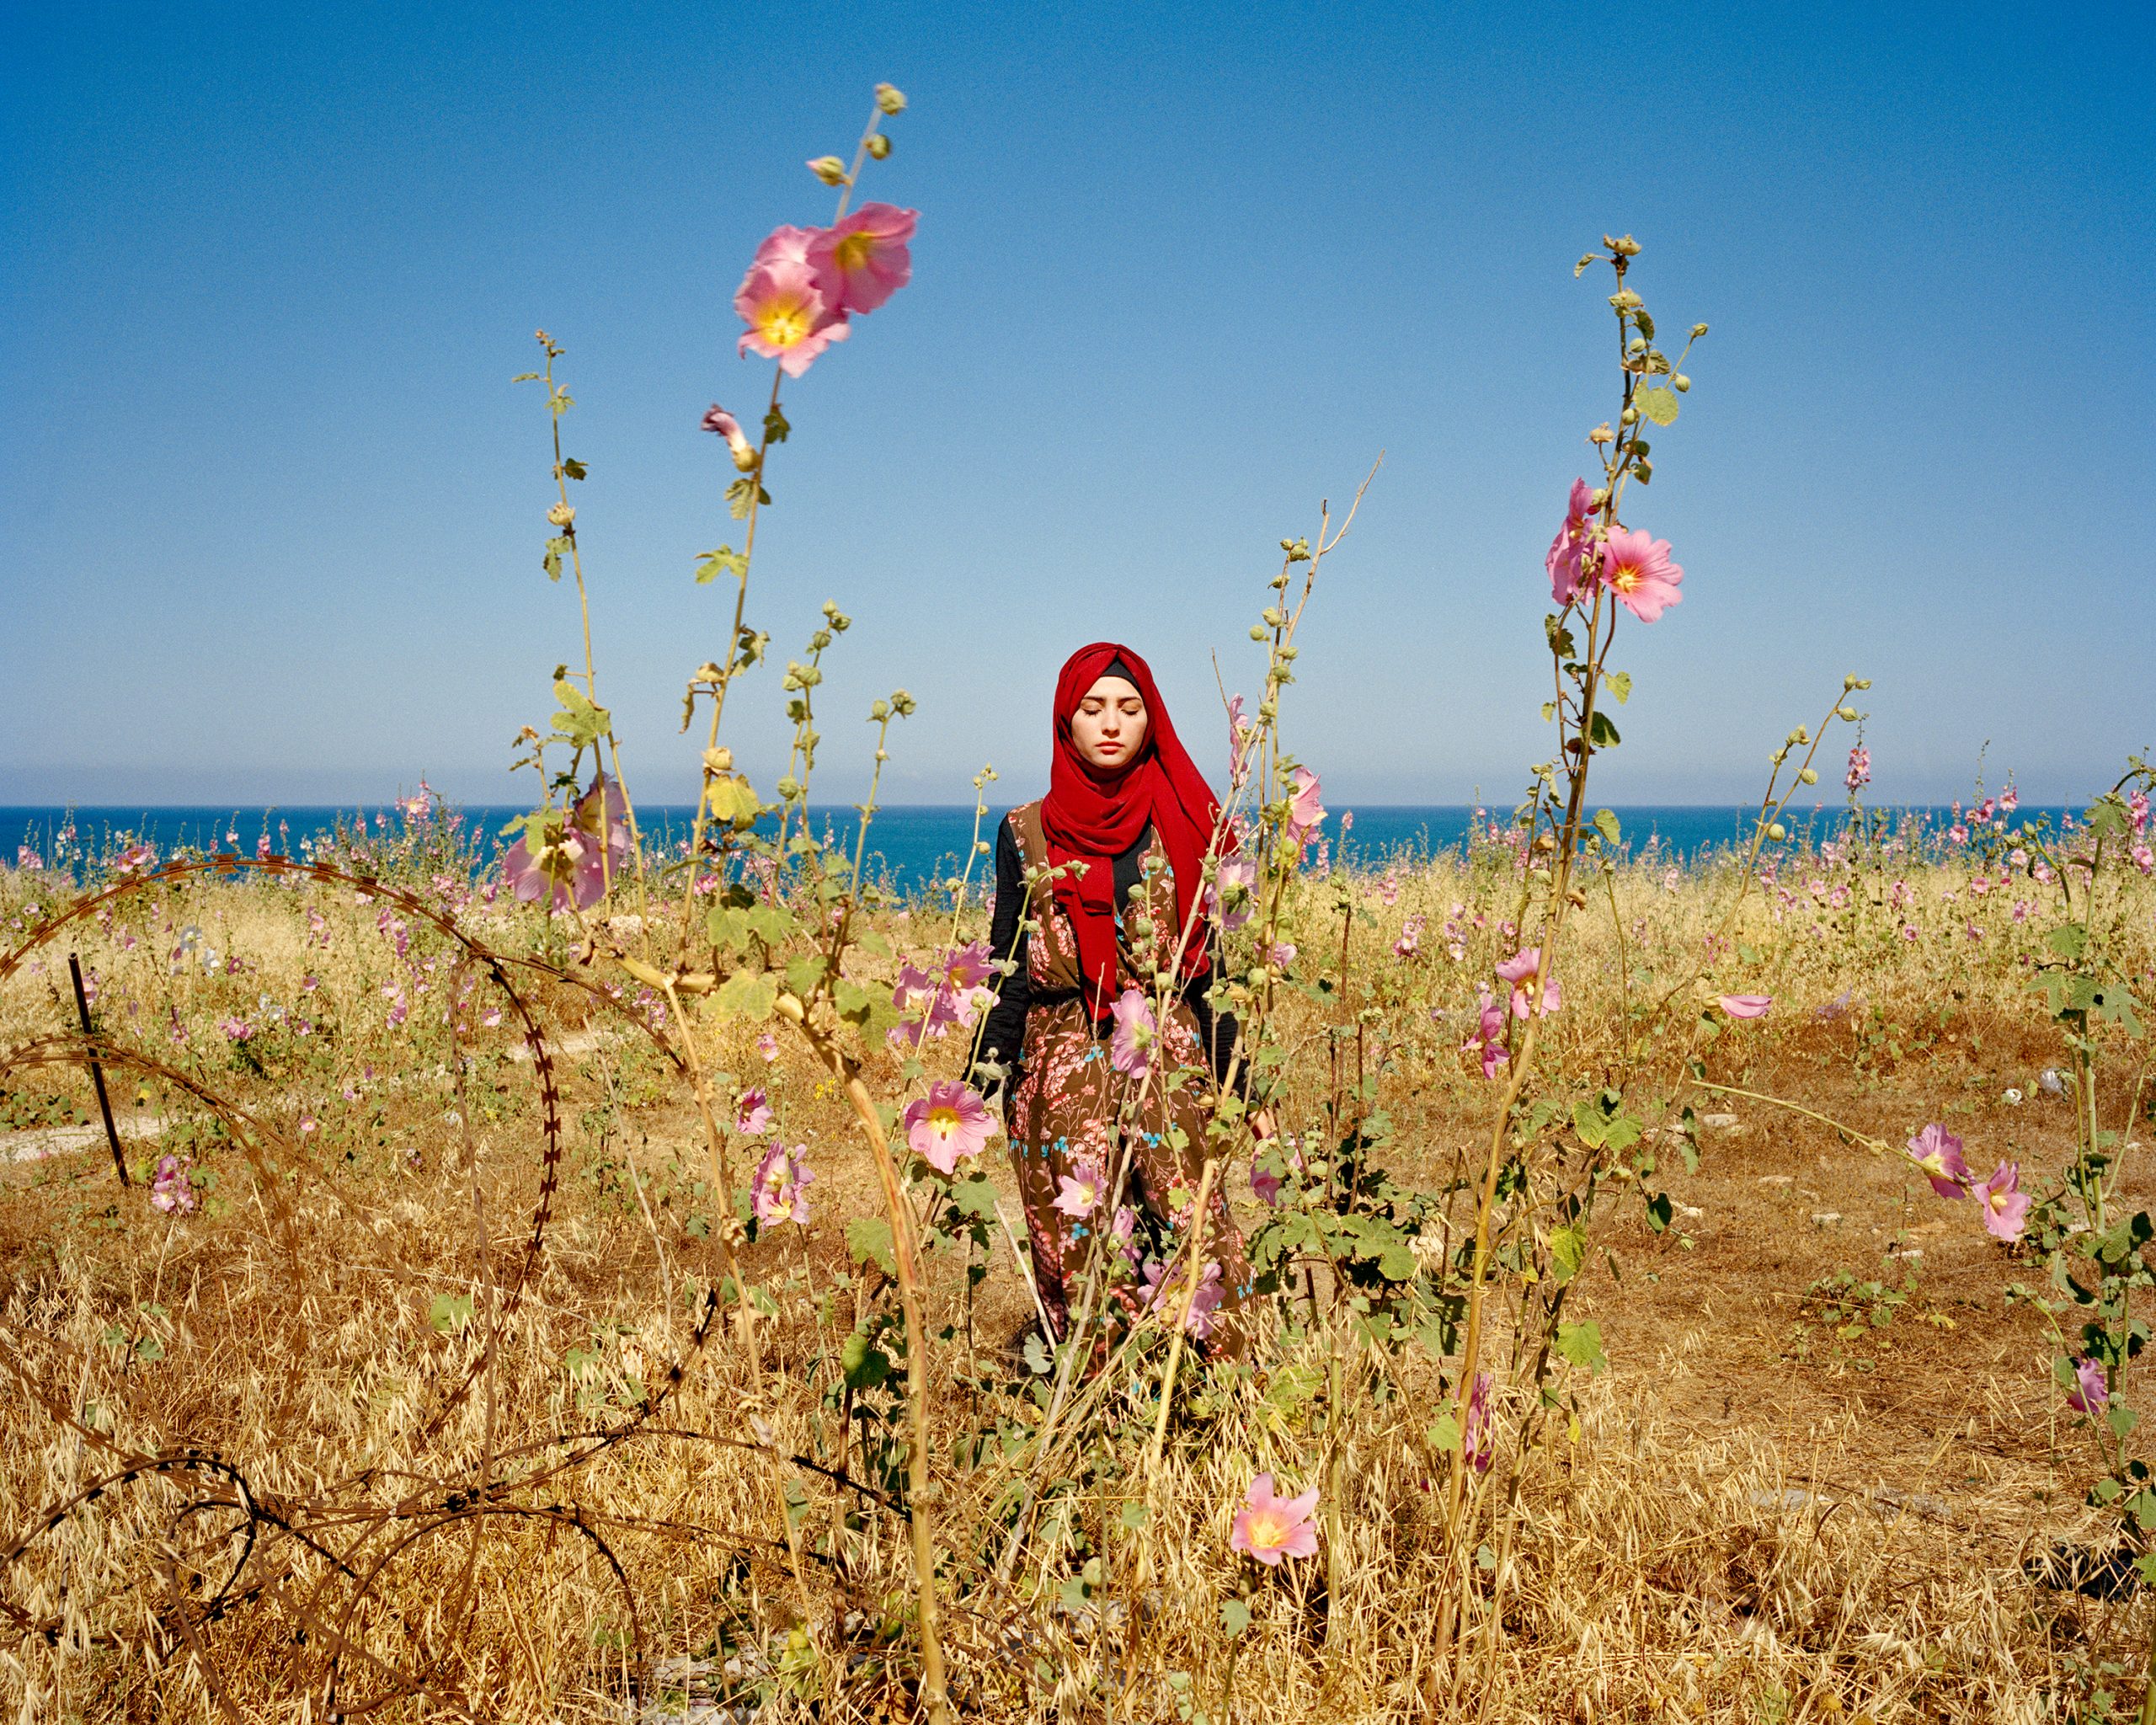 a girl in a red hijab stands in a field of pink flowers. her eyes are closed. behind her is the open ocean